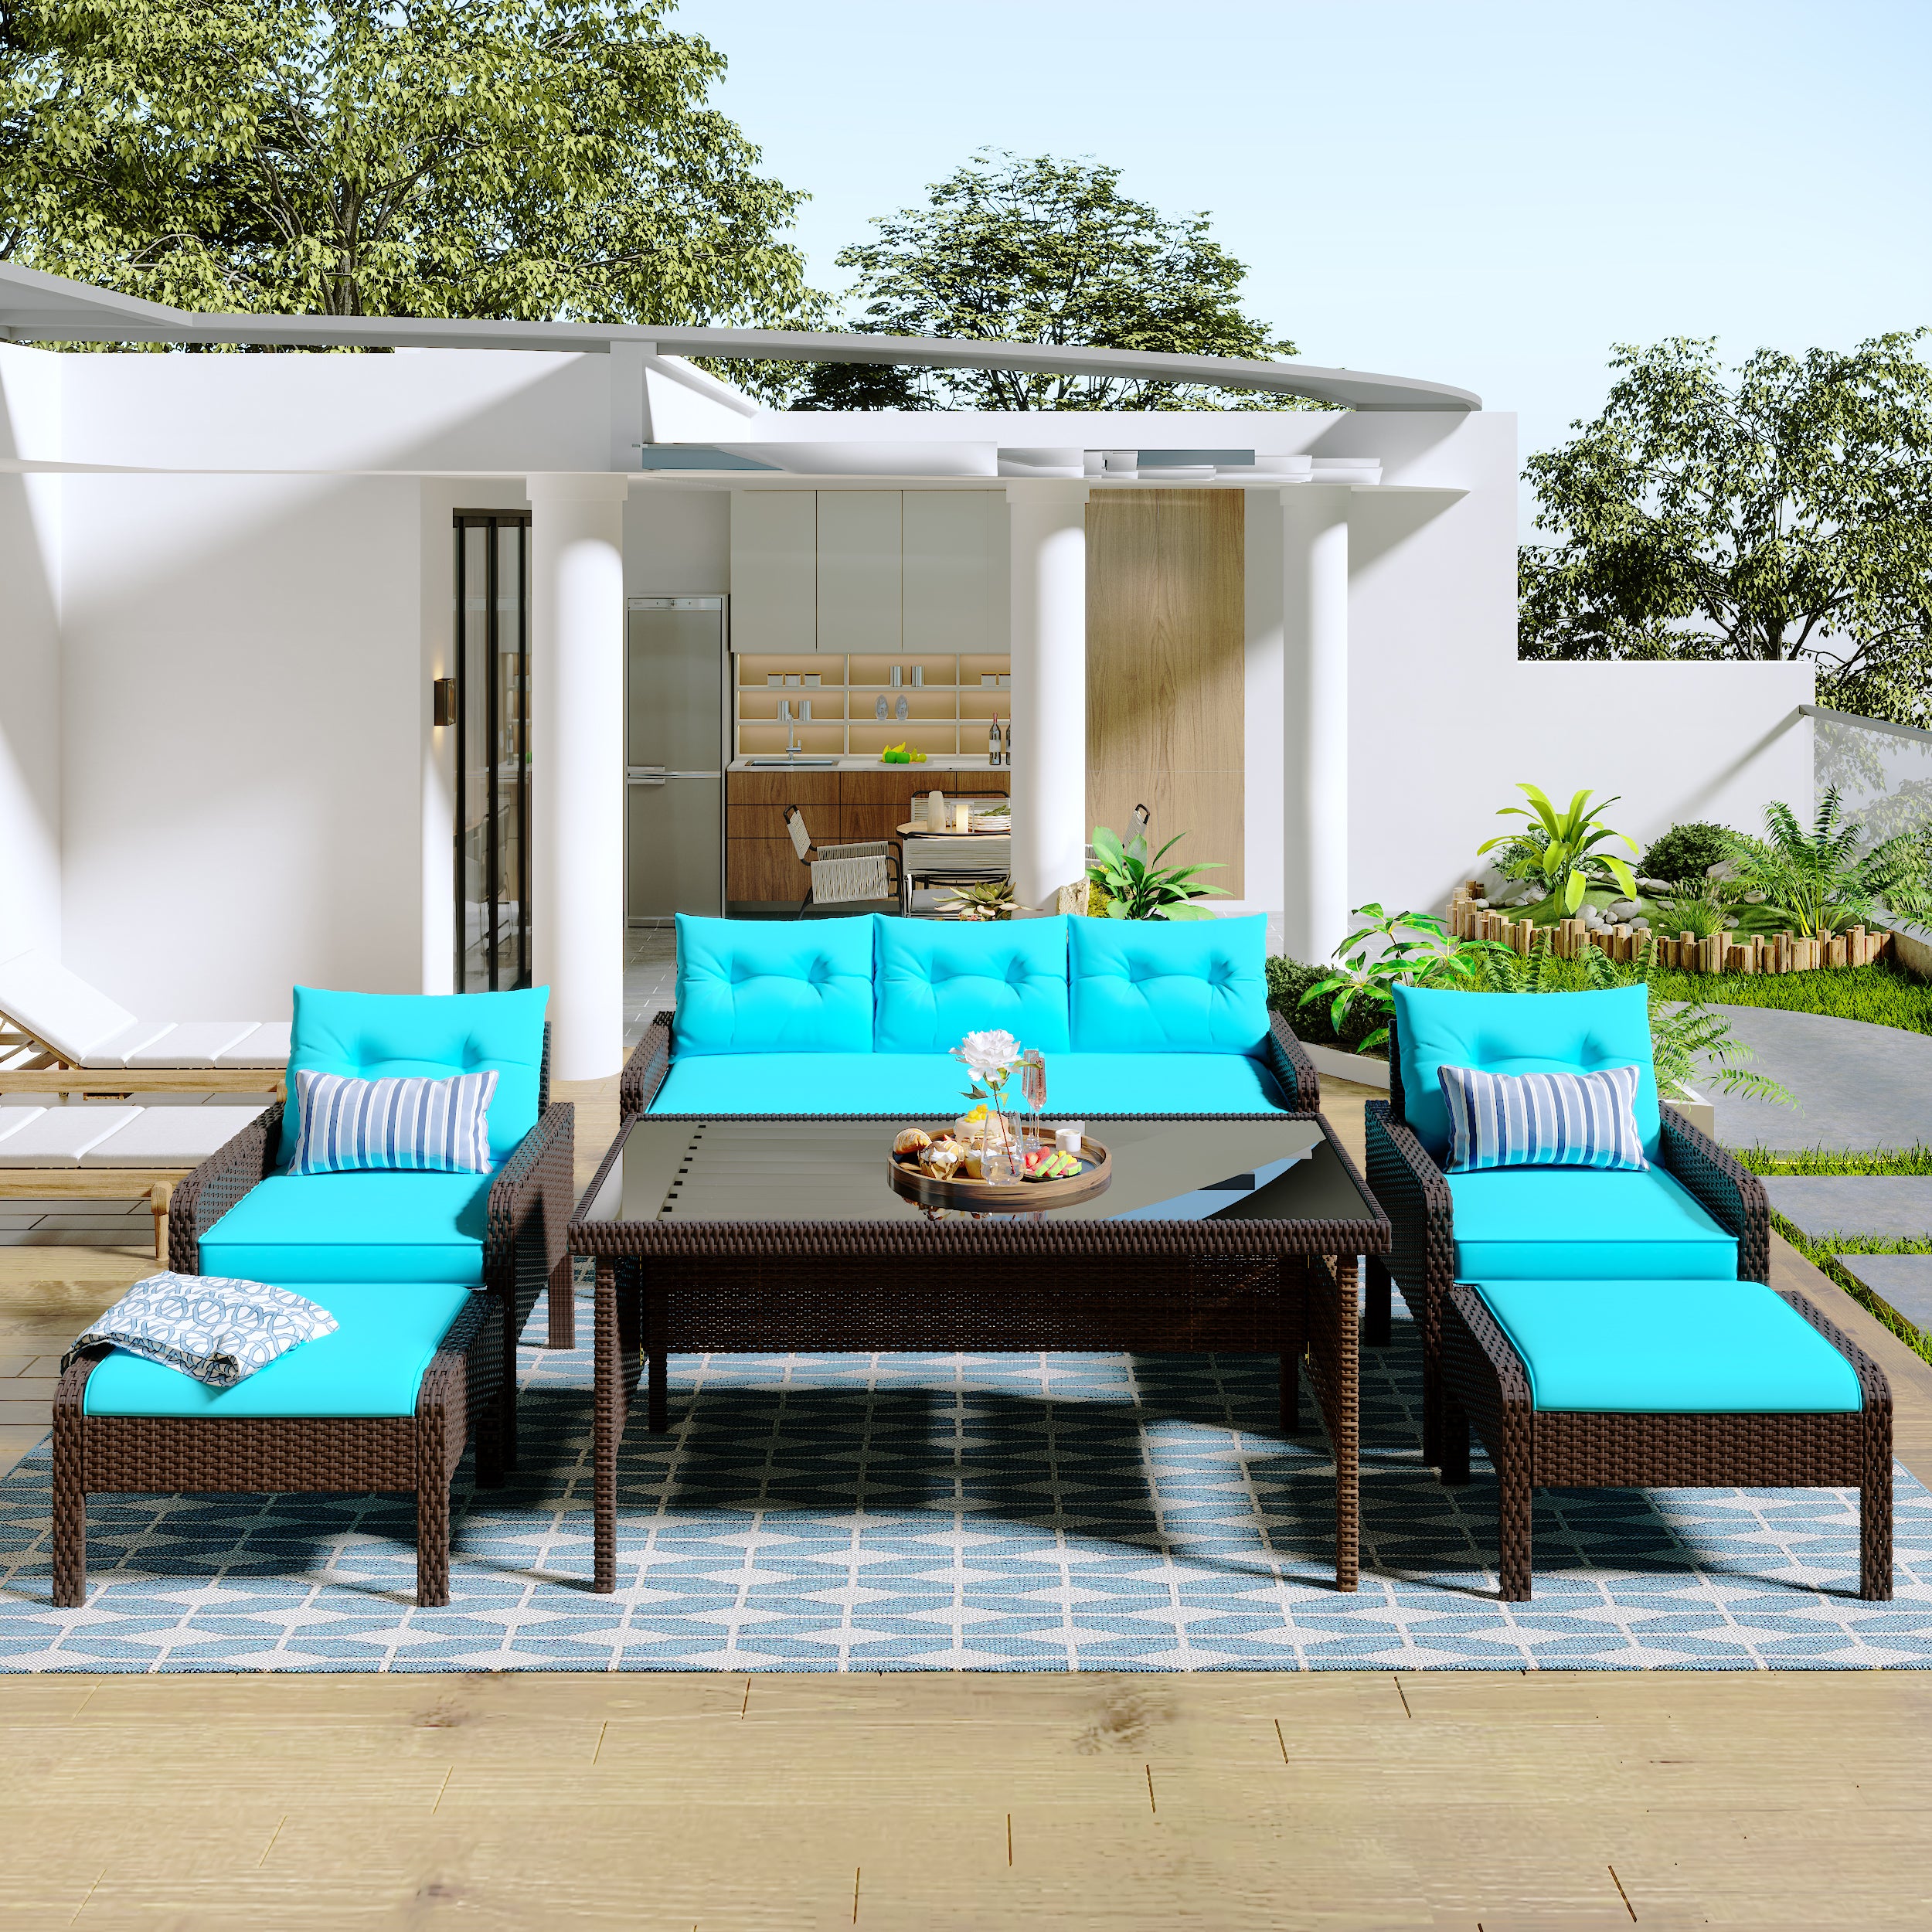 6-Piece Outdoor Patio Rattan Sofa Set with Removable Cushions and Glass Tea Table - Brown Wicker+Blue Cushion